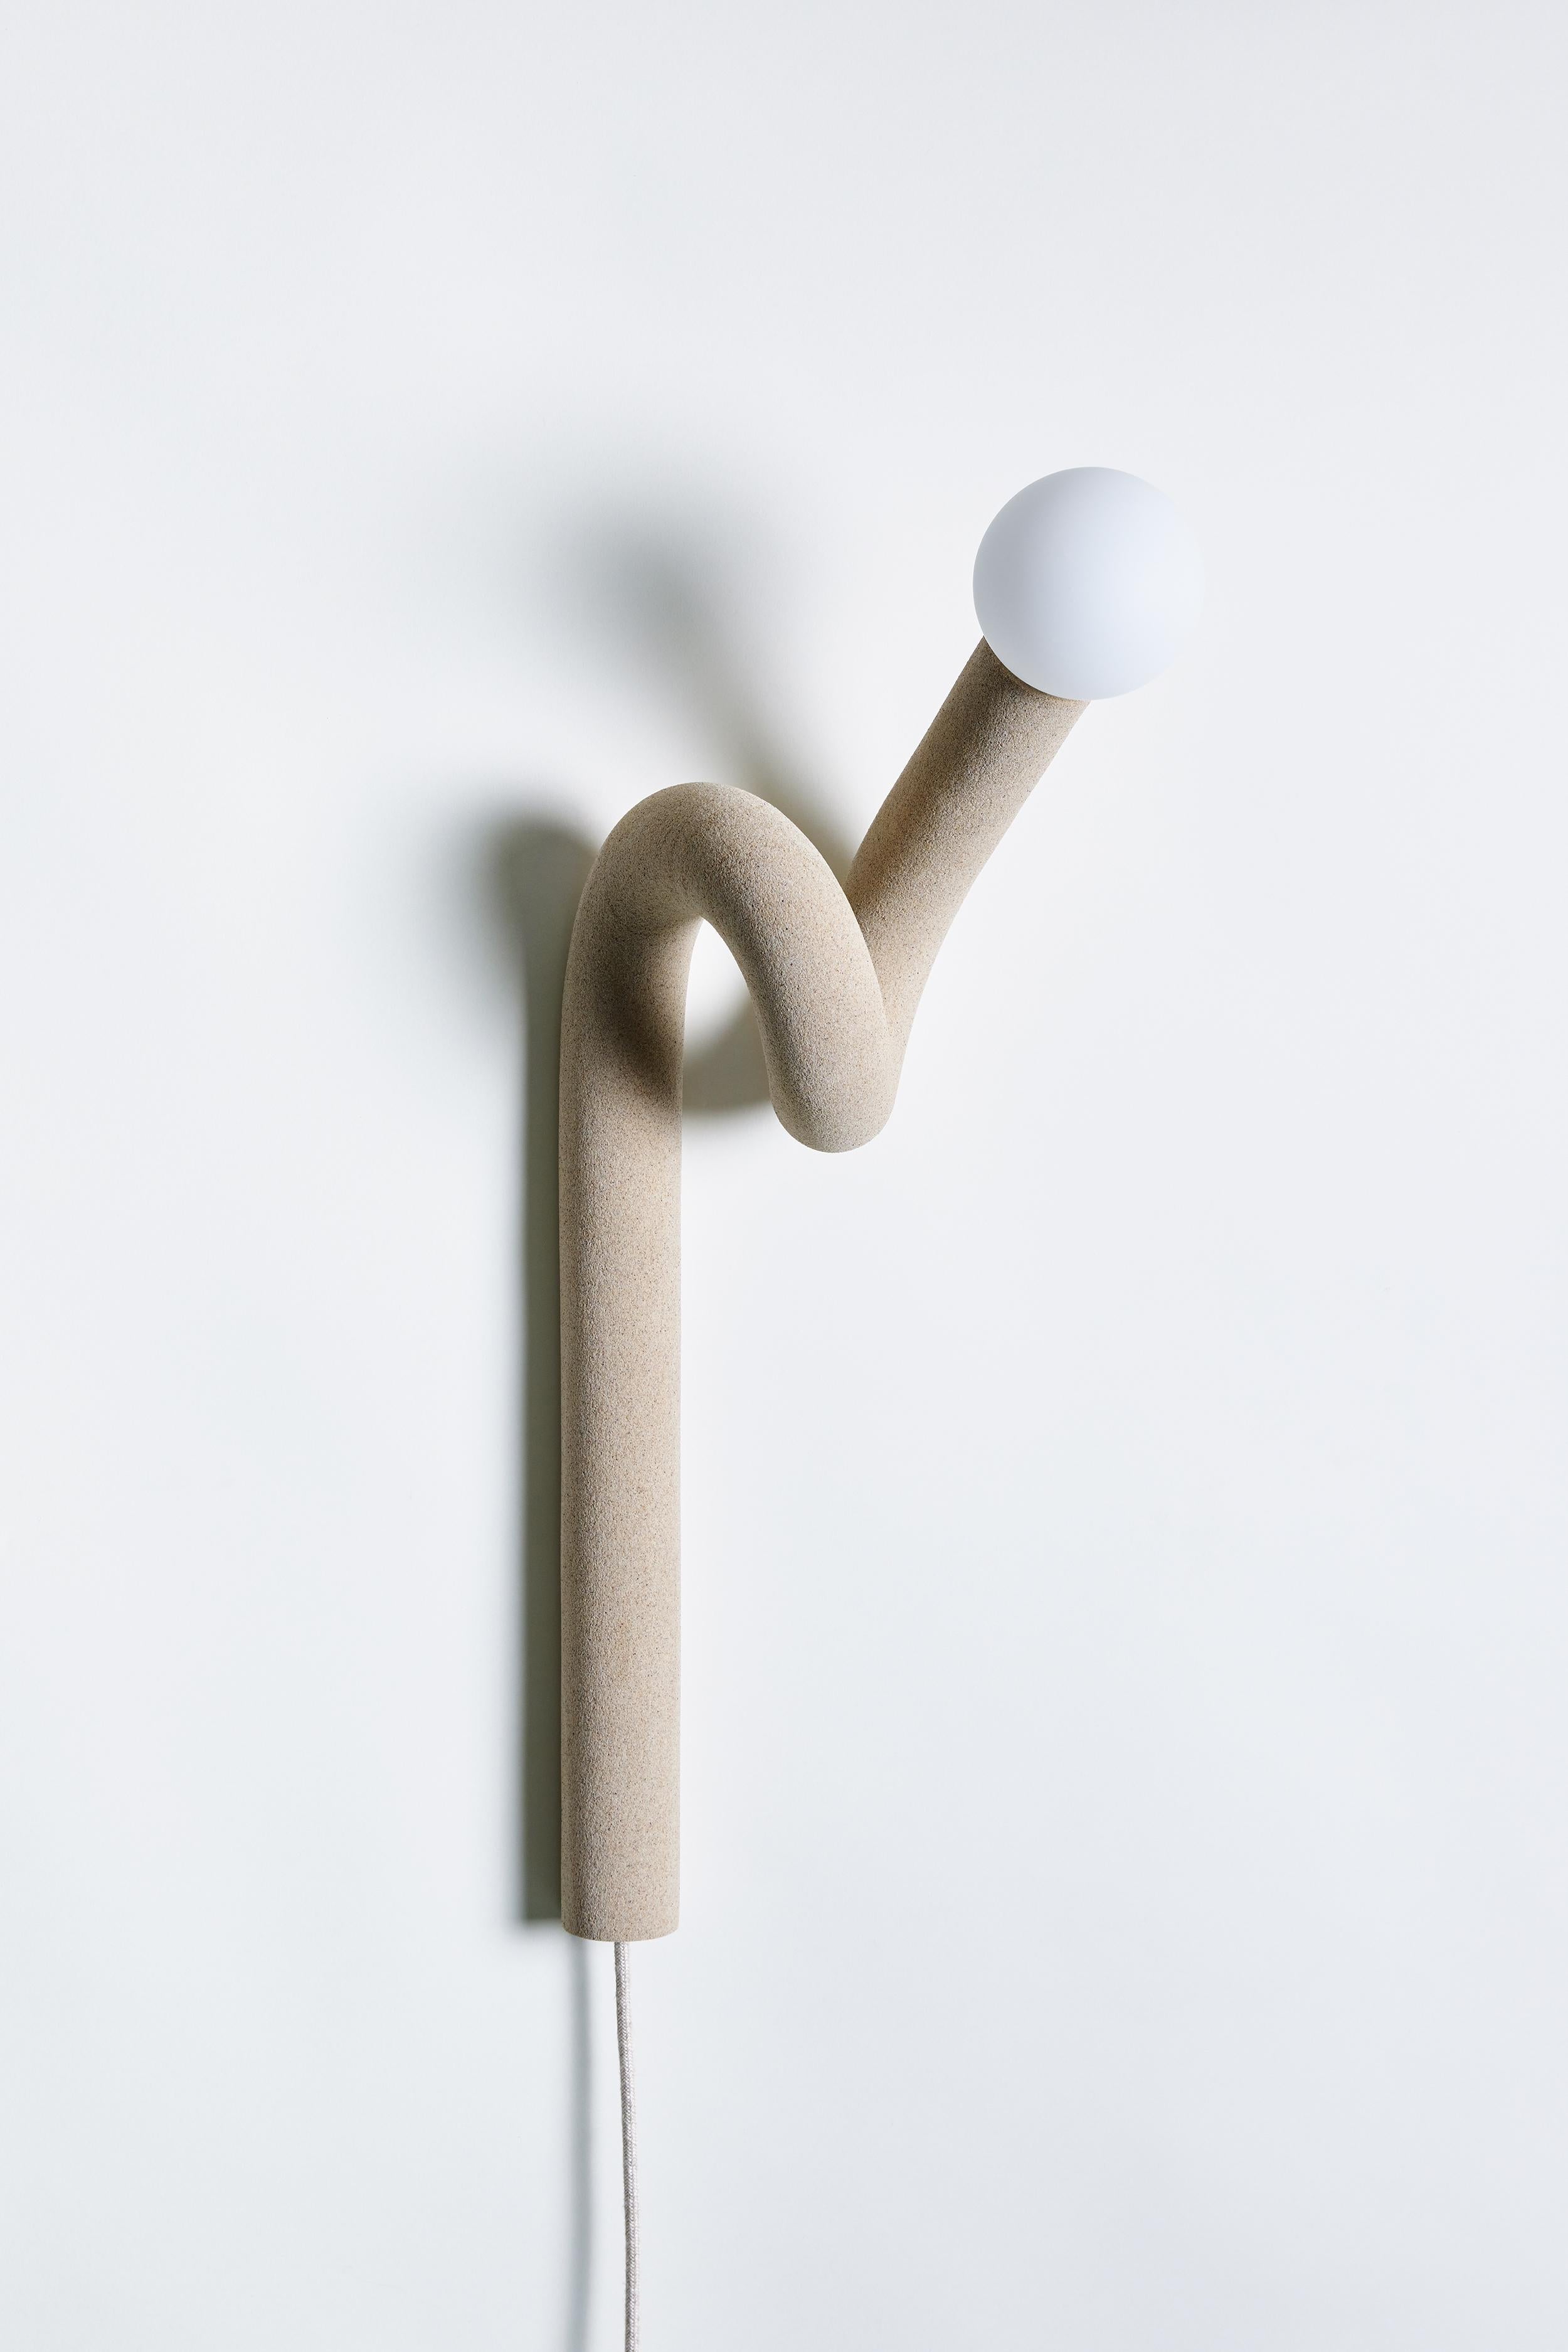 Beige Hotel Light 11 Wall Light by Hot Wire Extensions
Dimensions: D 30 x W 34 x H 197 cm 
Materials: Waste nylon powder, locally sourced beige sand, copper pipe, hand-blown glass bulb, natural cotton electrical.
3 kg

Also available in color: